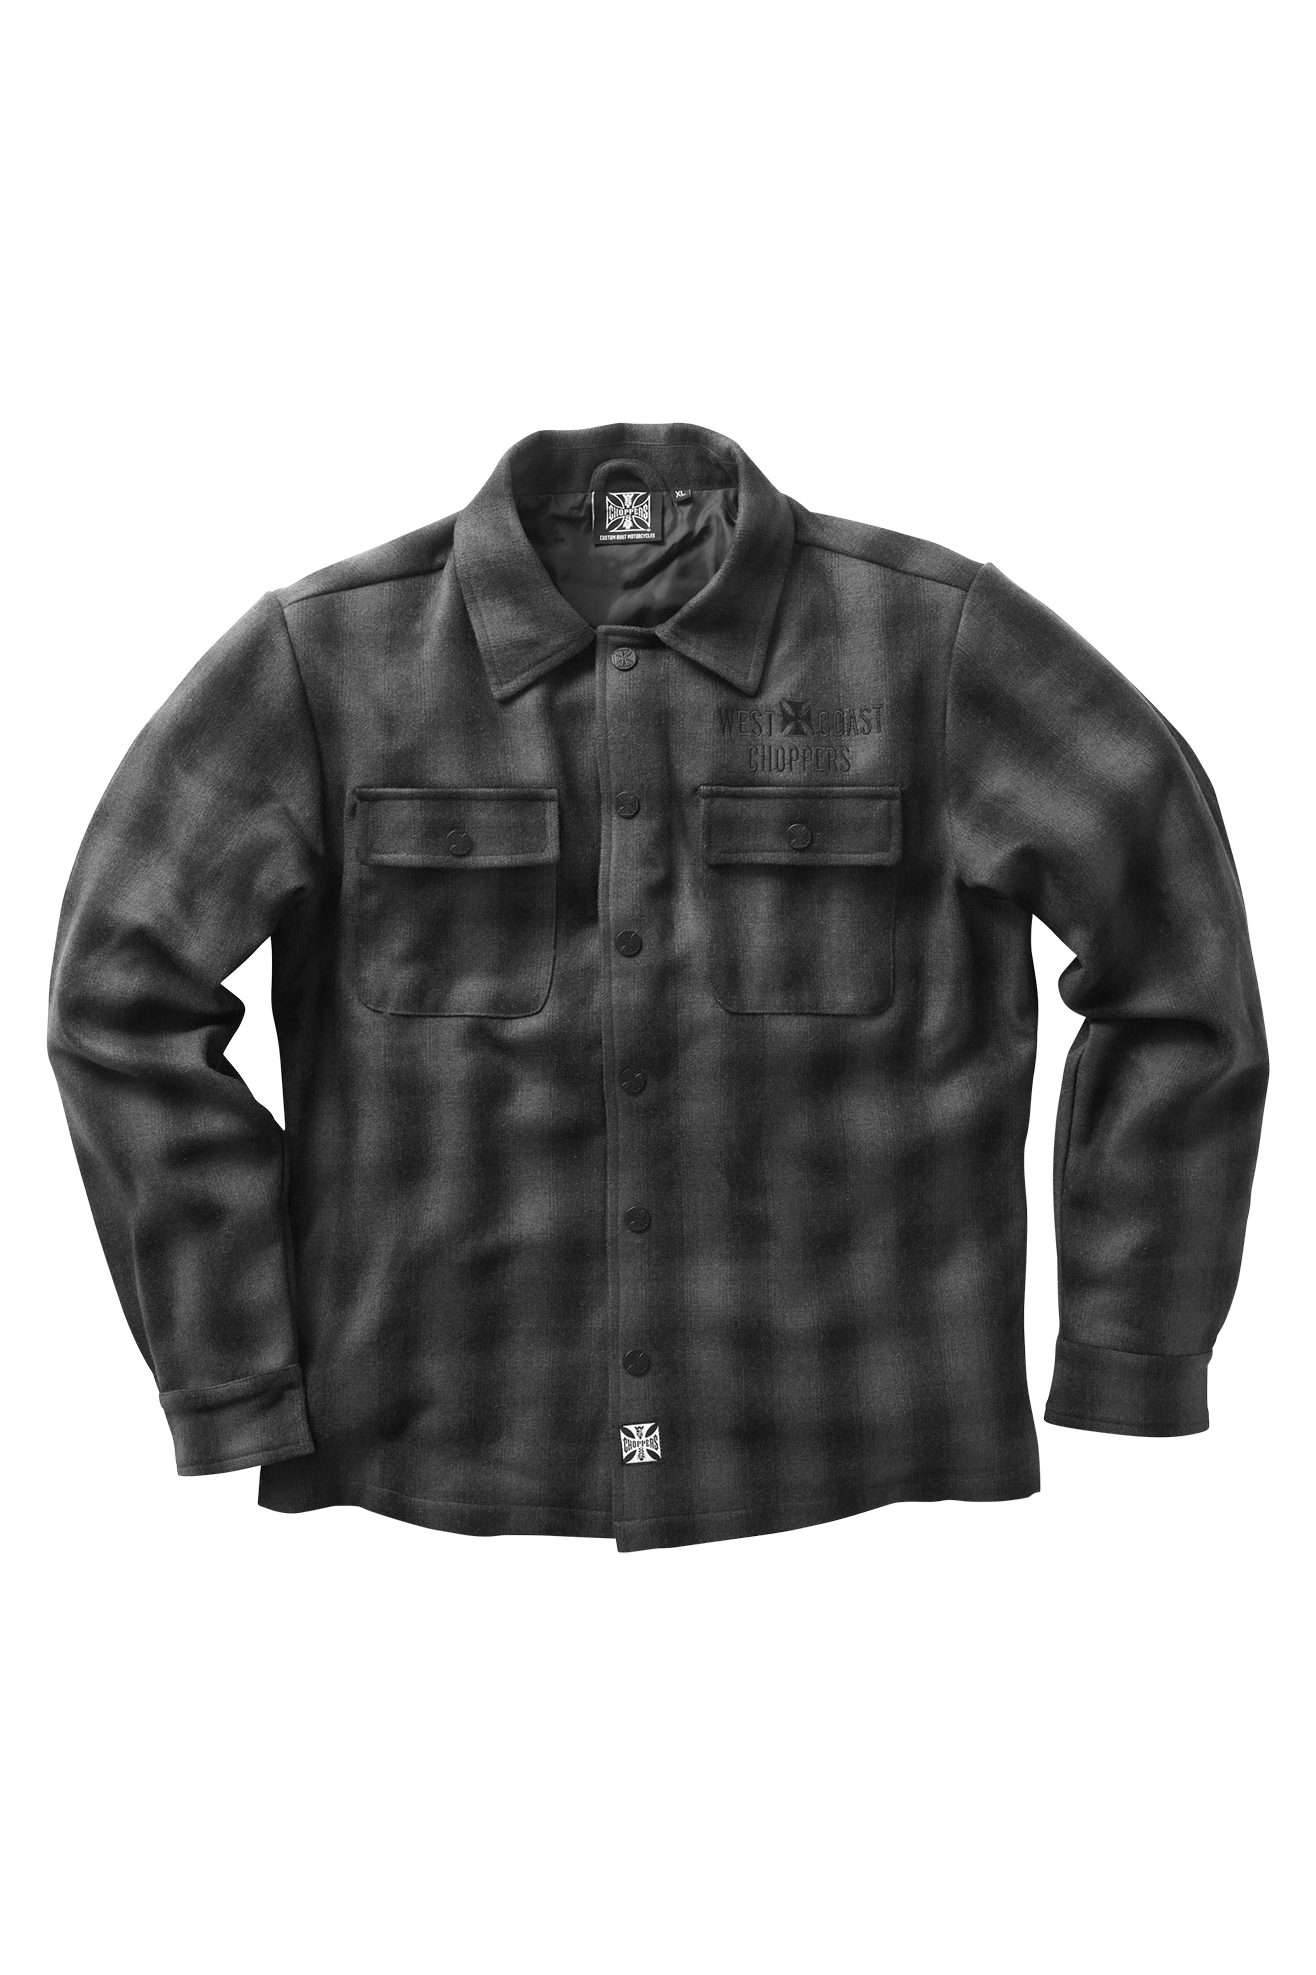 West Coast Choppers Chaqueta  Wool Lined Plaid Gris-Negro